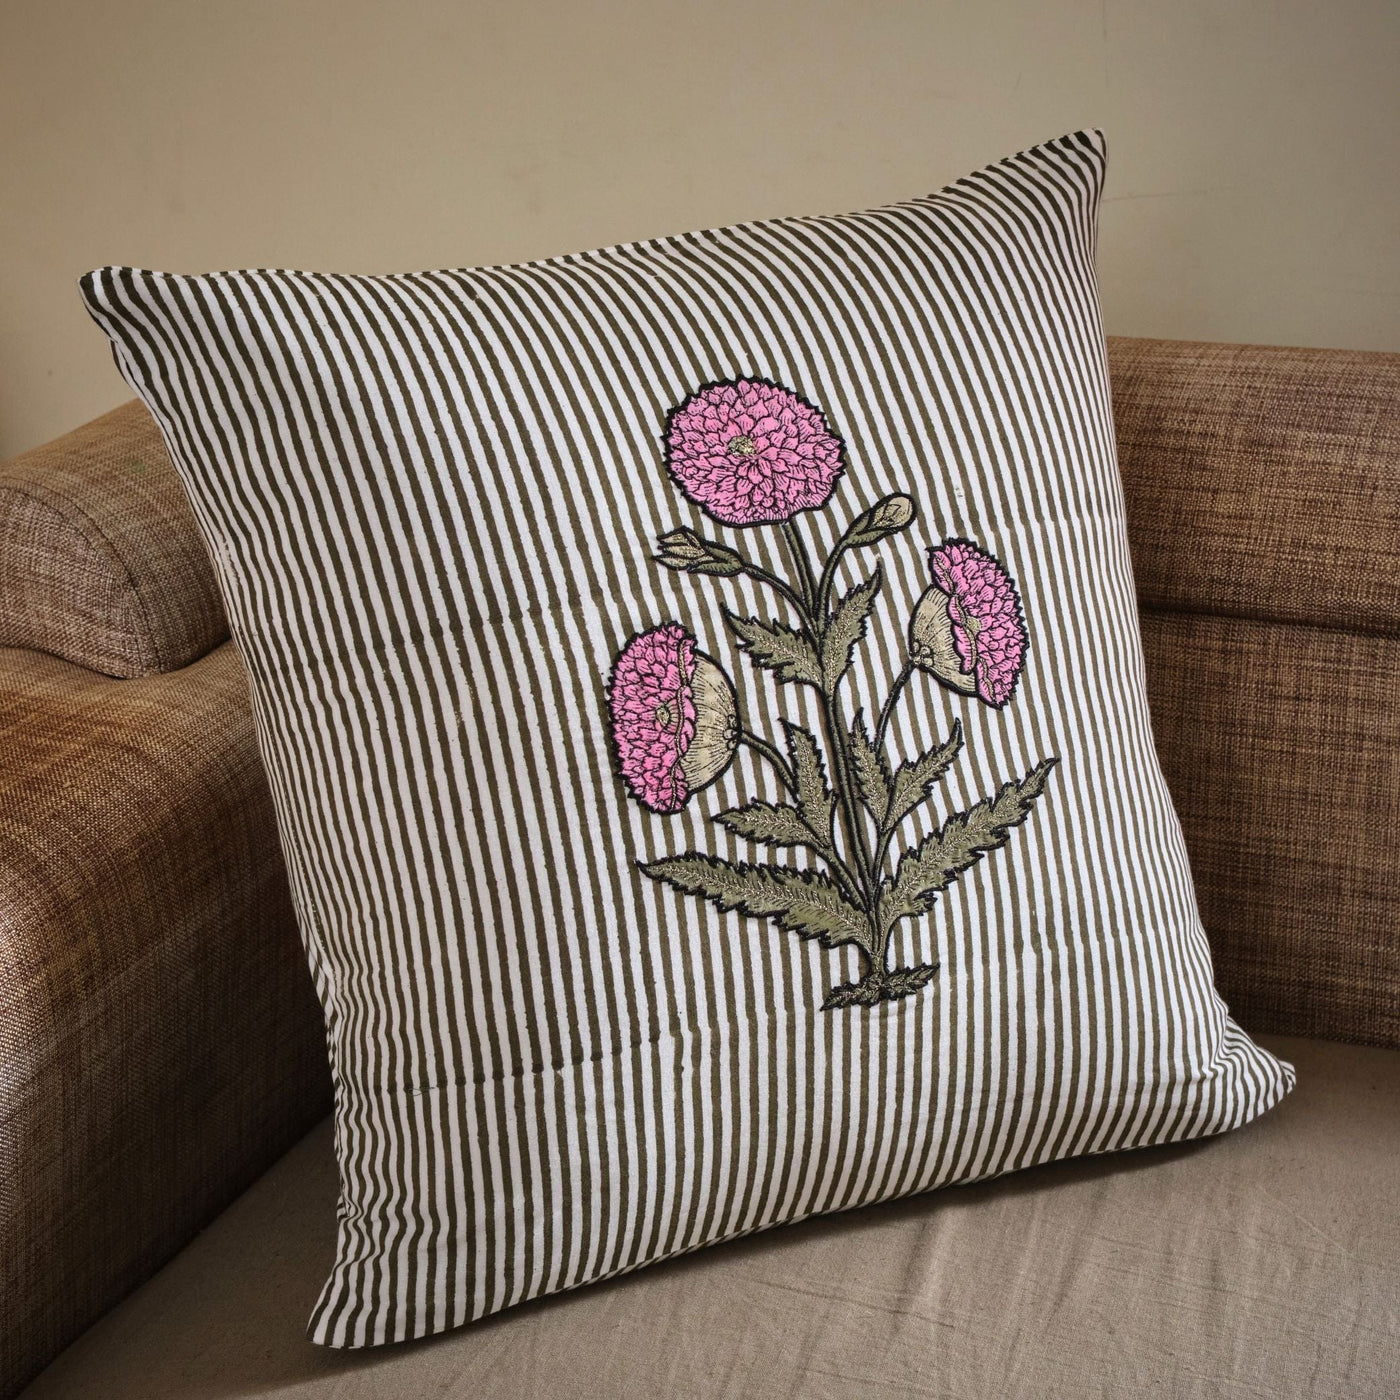 The Fabricrush  Pillowcases & Shams Pink Striped Embroidery Flower Cushion Cover